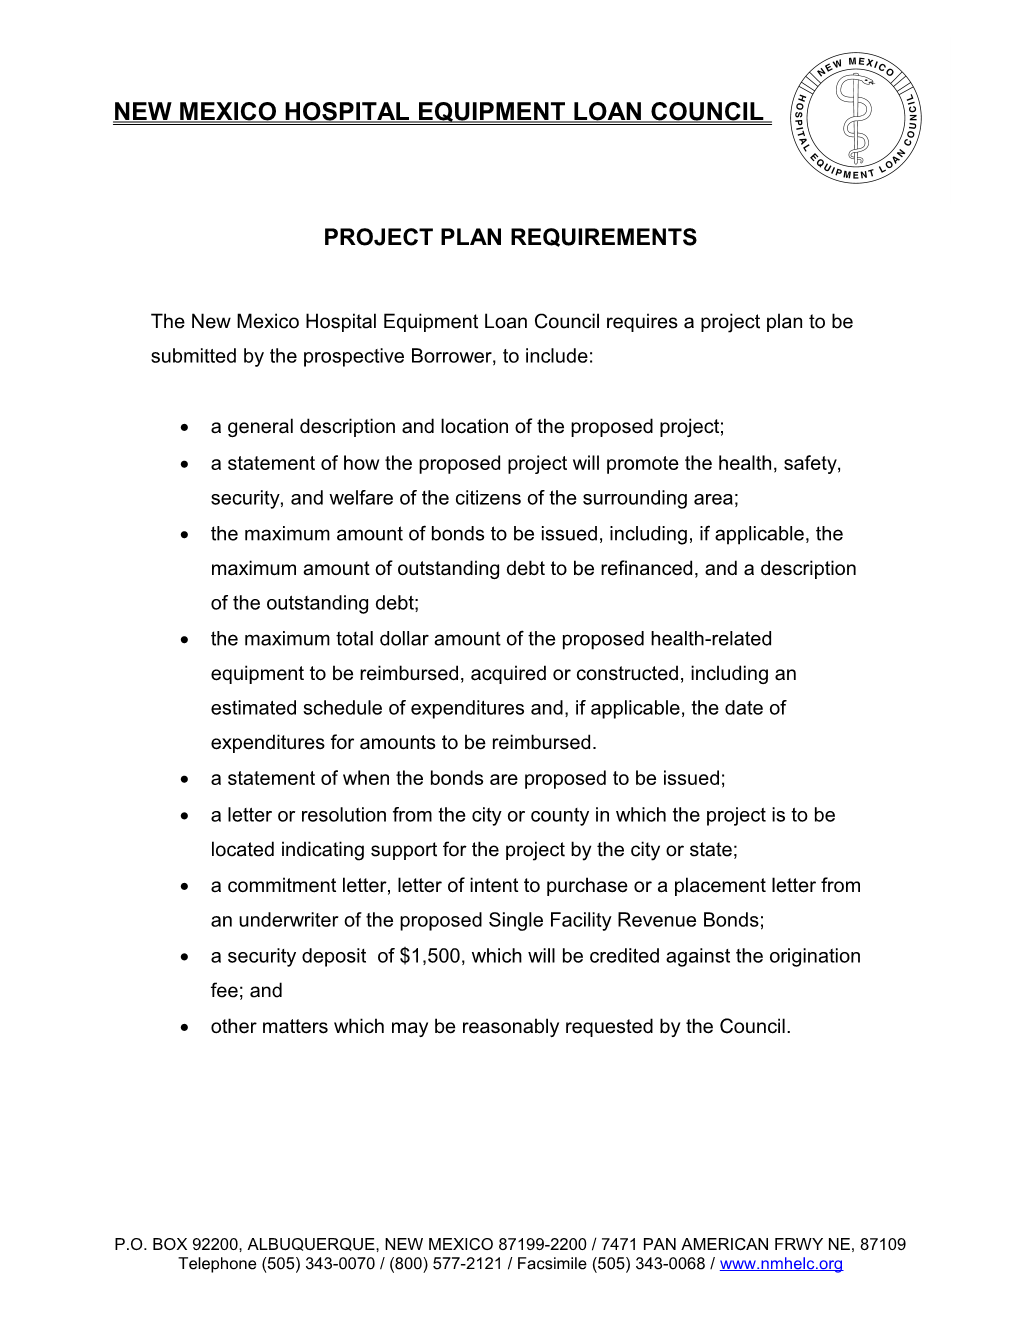 Project Plan Requirements